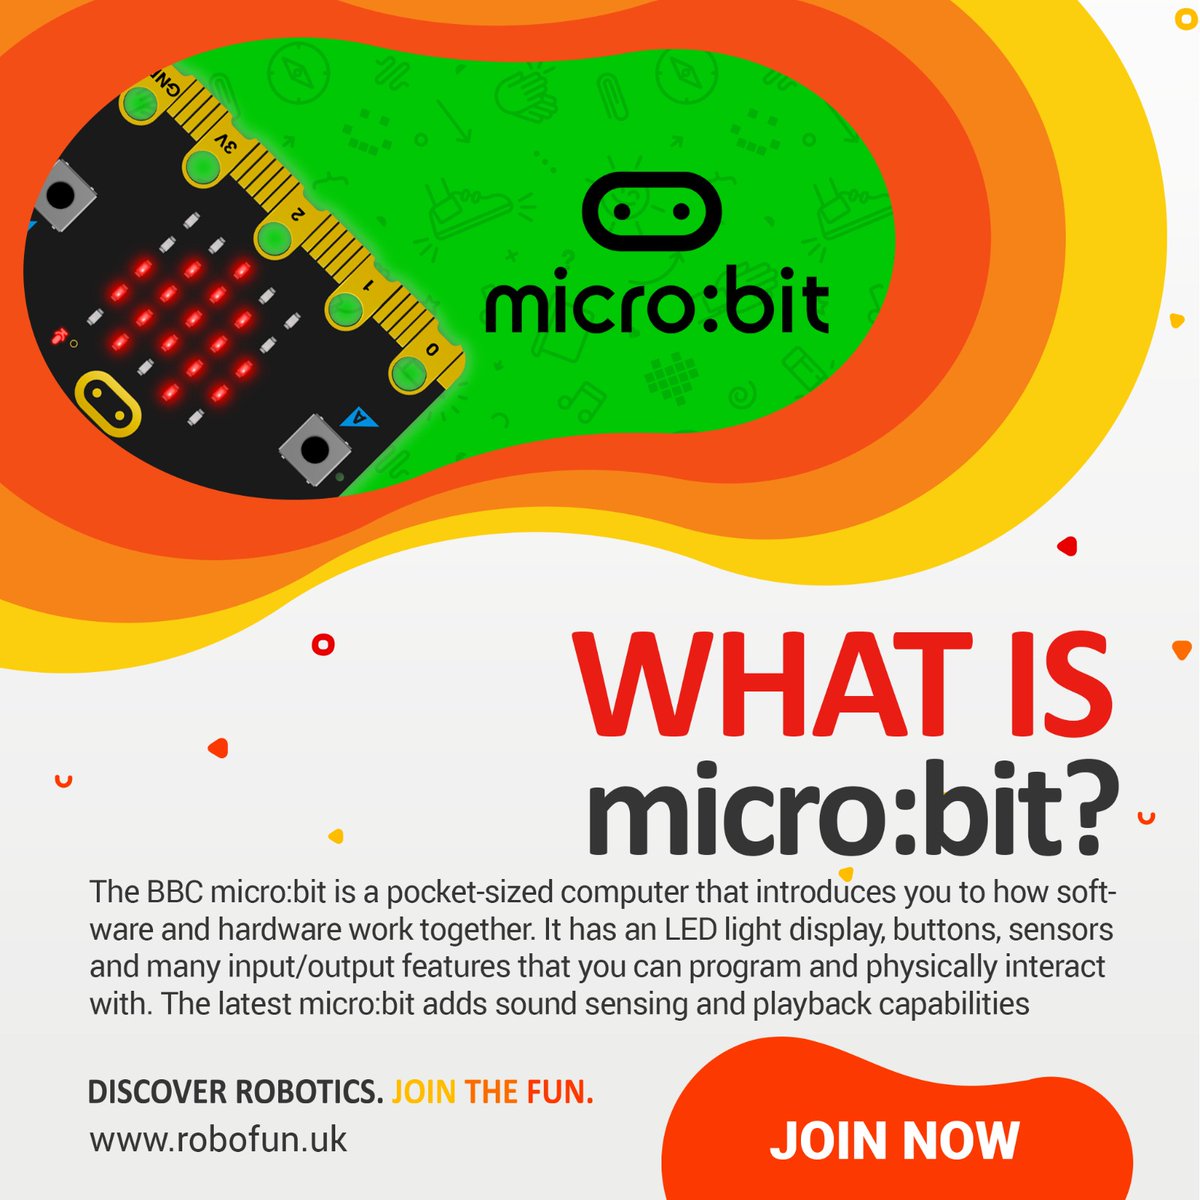 💥💥JOIN NOW💥💥 Micro:bit course is available on robofun.uk BBC Micro:bit lessons aimed at pupils aged 7-14 years. Pupils explore data and the sensors on the BBC micro:bit through a variety of unplugged and programming activities. Join Now #robofunuk #microbit